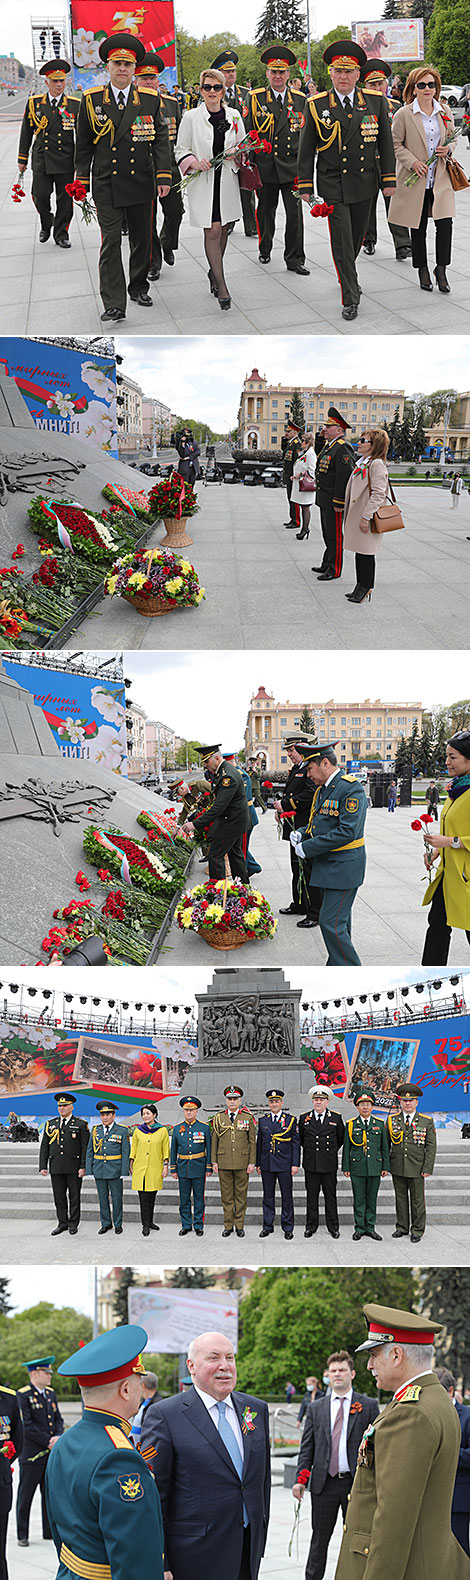 Flowers are laid in Victory Square in Minsk